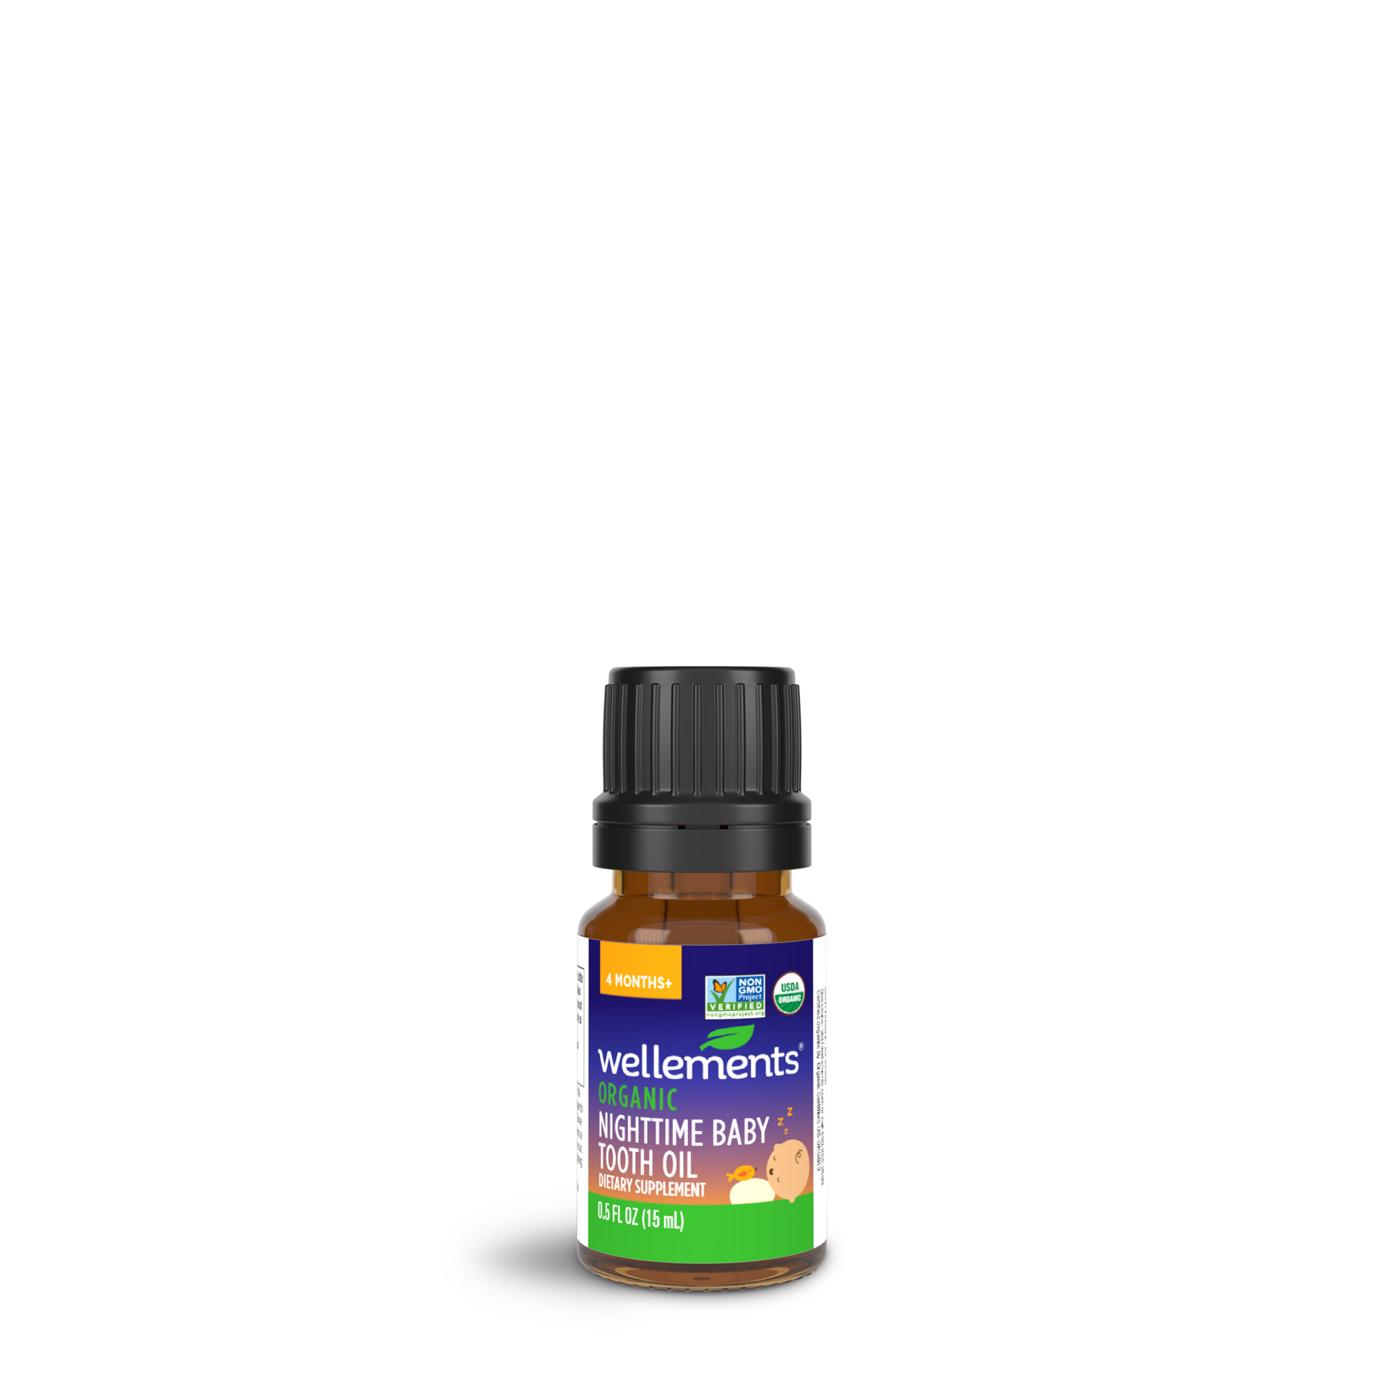 Wellements Organic Nighttime Baby Tooth Oil; image 4 of 4